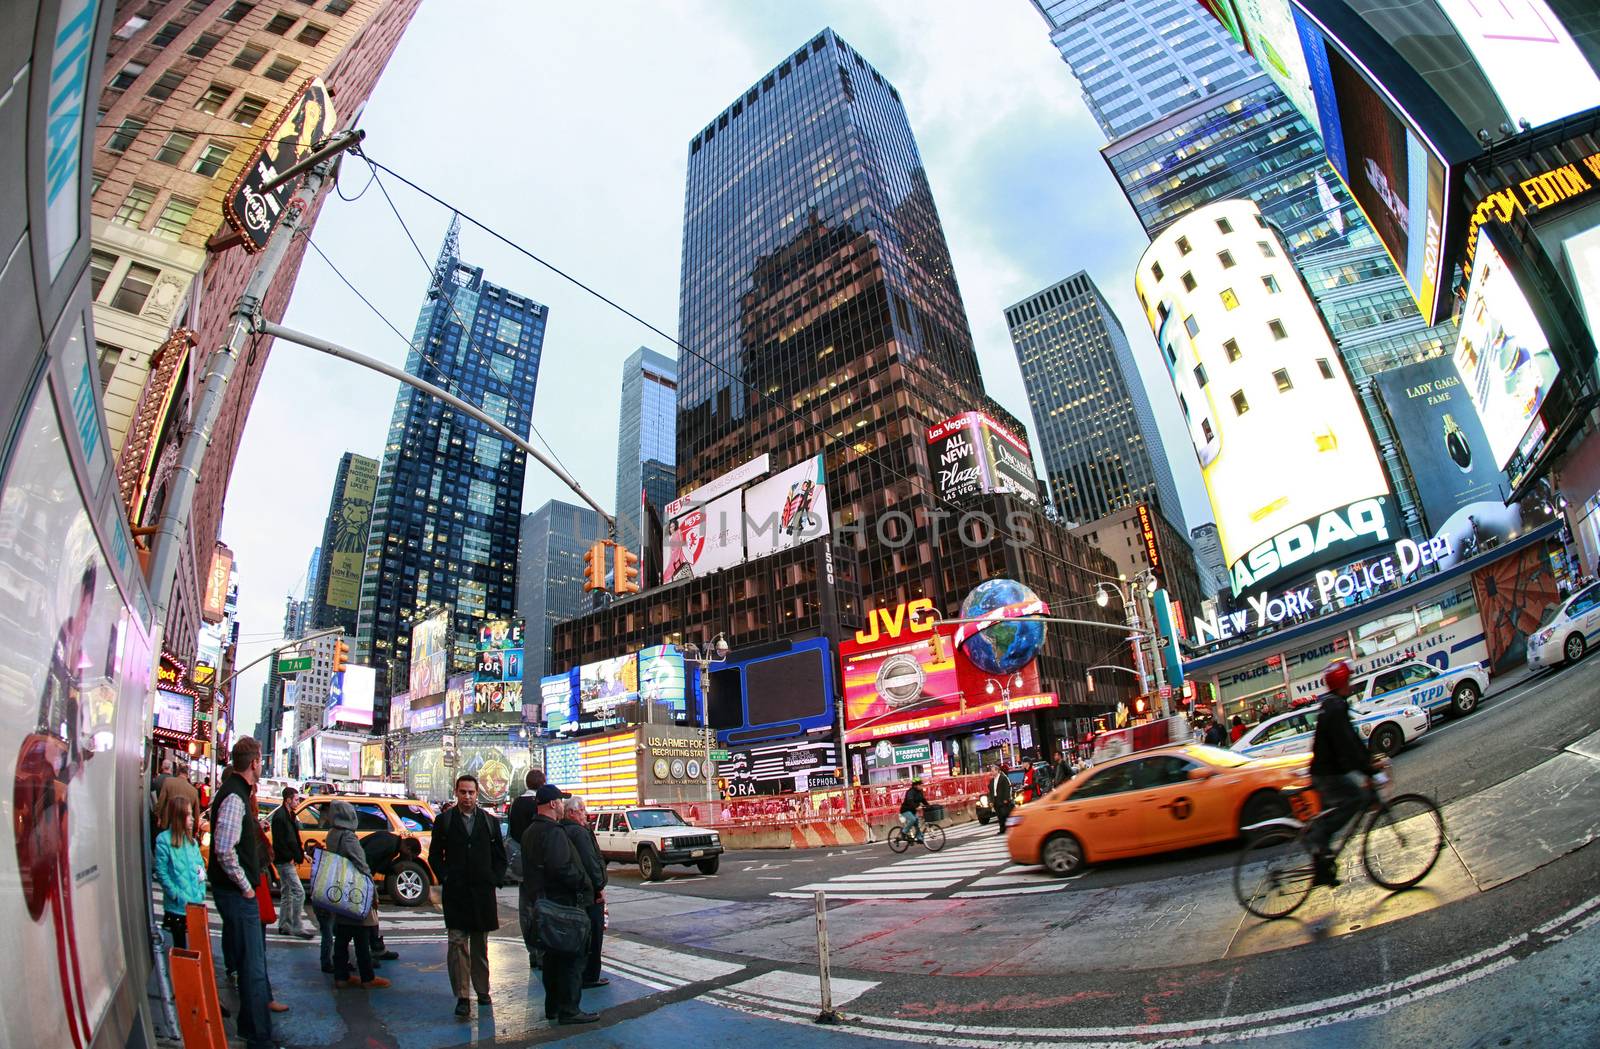 New York, NY, USA - October 09, 2012: Times Square, featured with Broadway Theaters and huge number of LED signs, is a symbol of New York City and the United States, October 12, 2012 in Manhattan, New York City